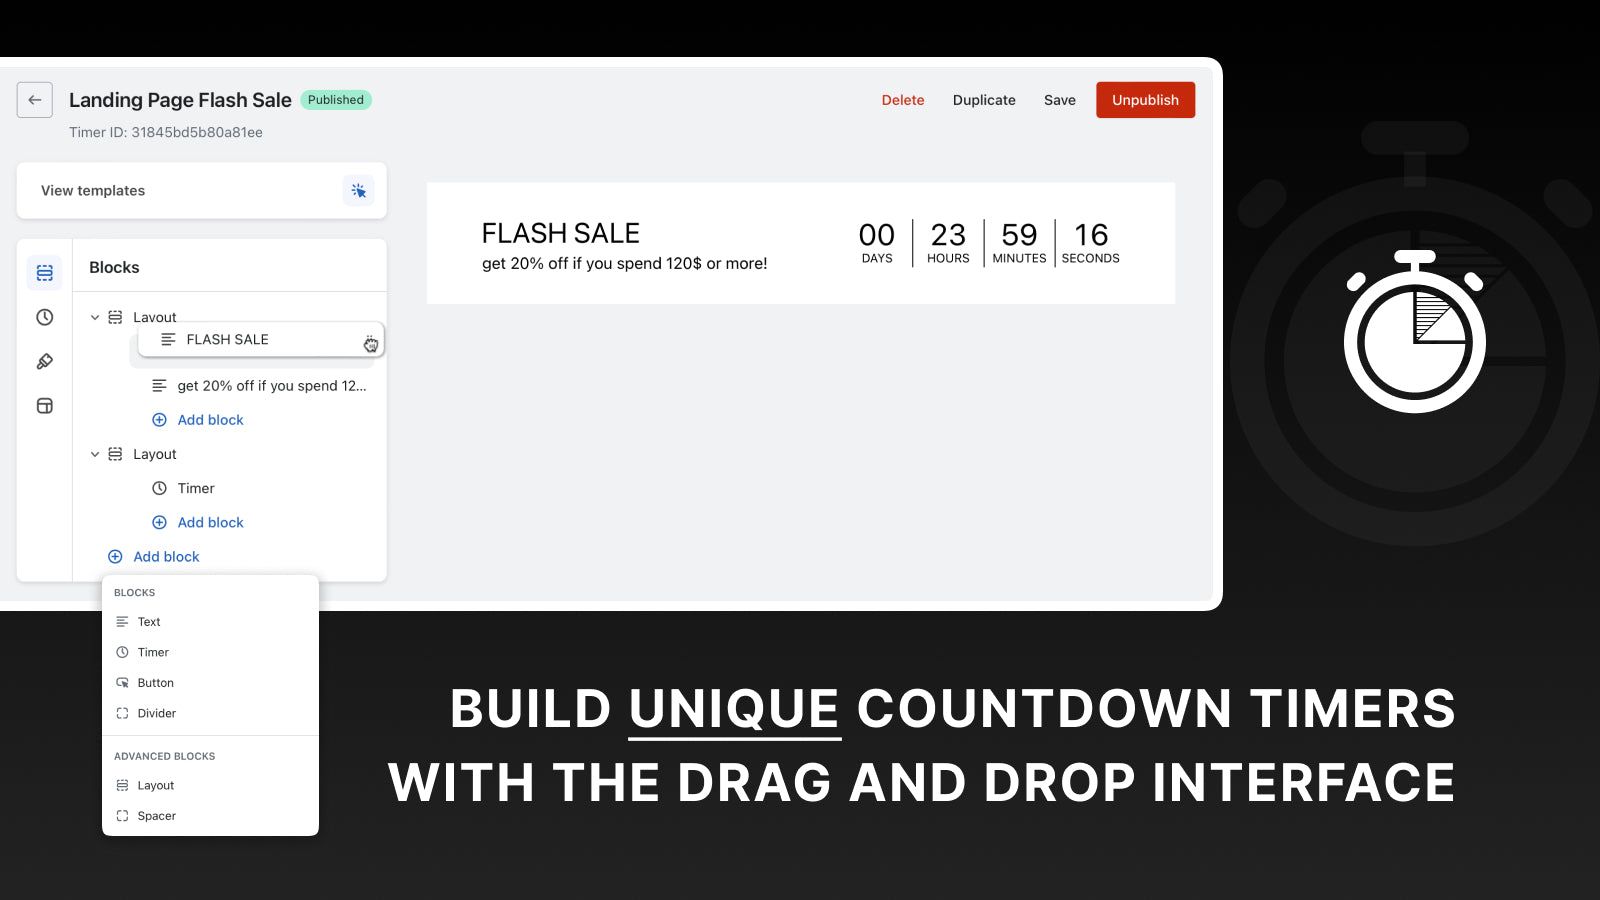 Build unique countdown timers with the drag and drop interface